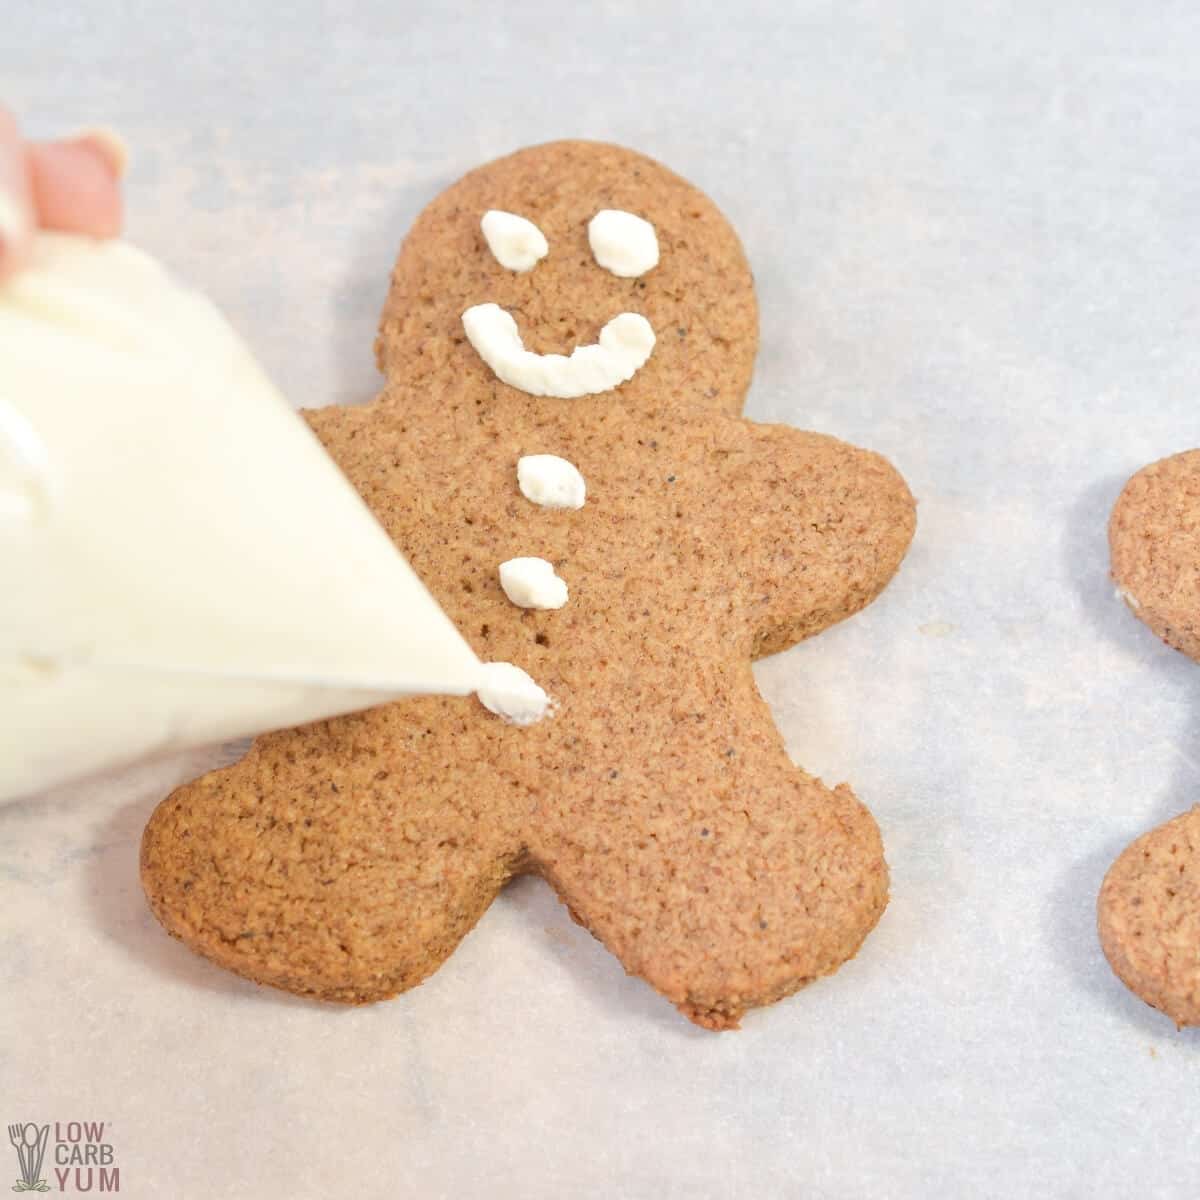 decorating a baked gingerbread man cookie